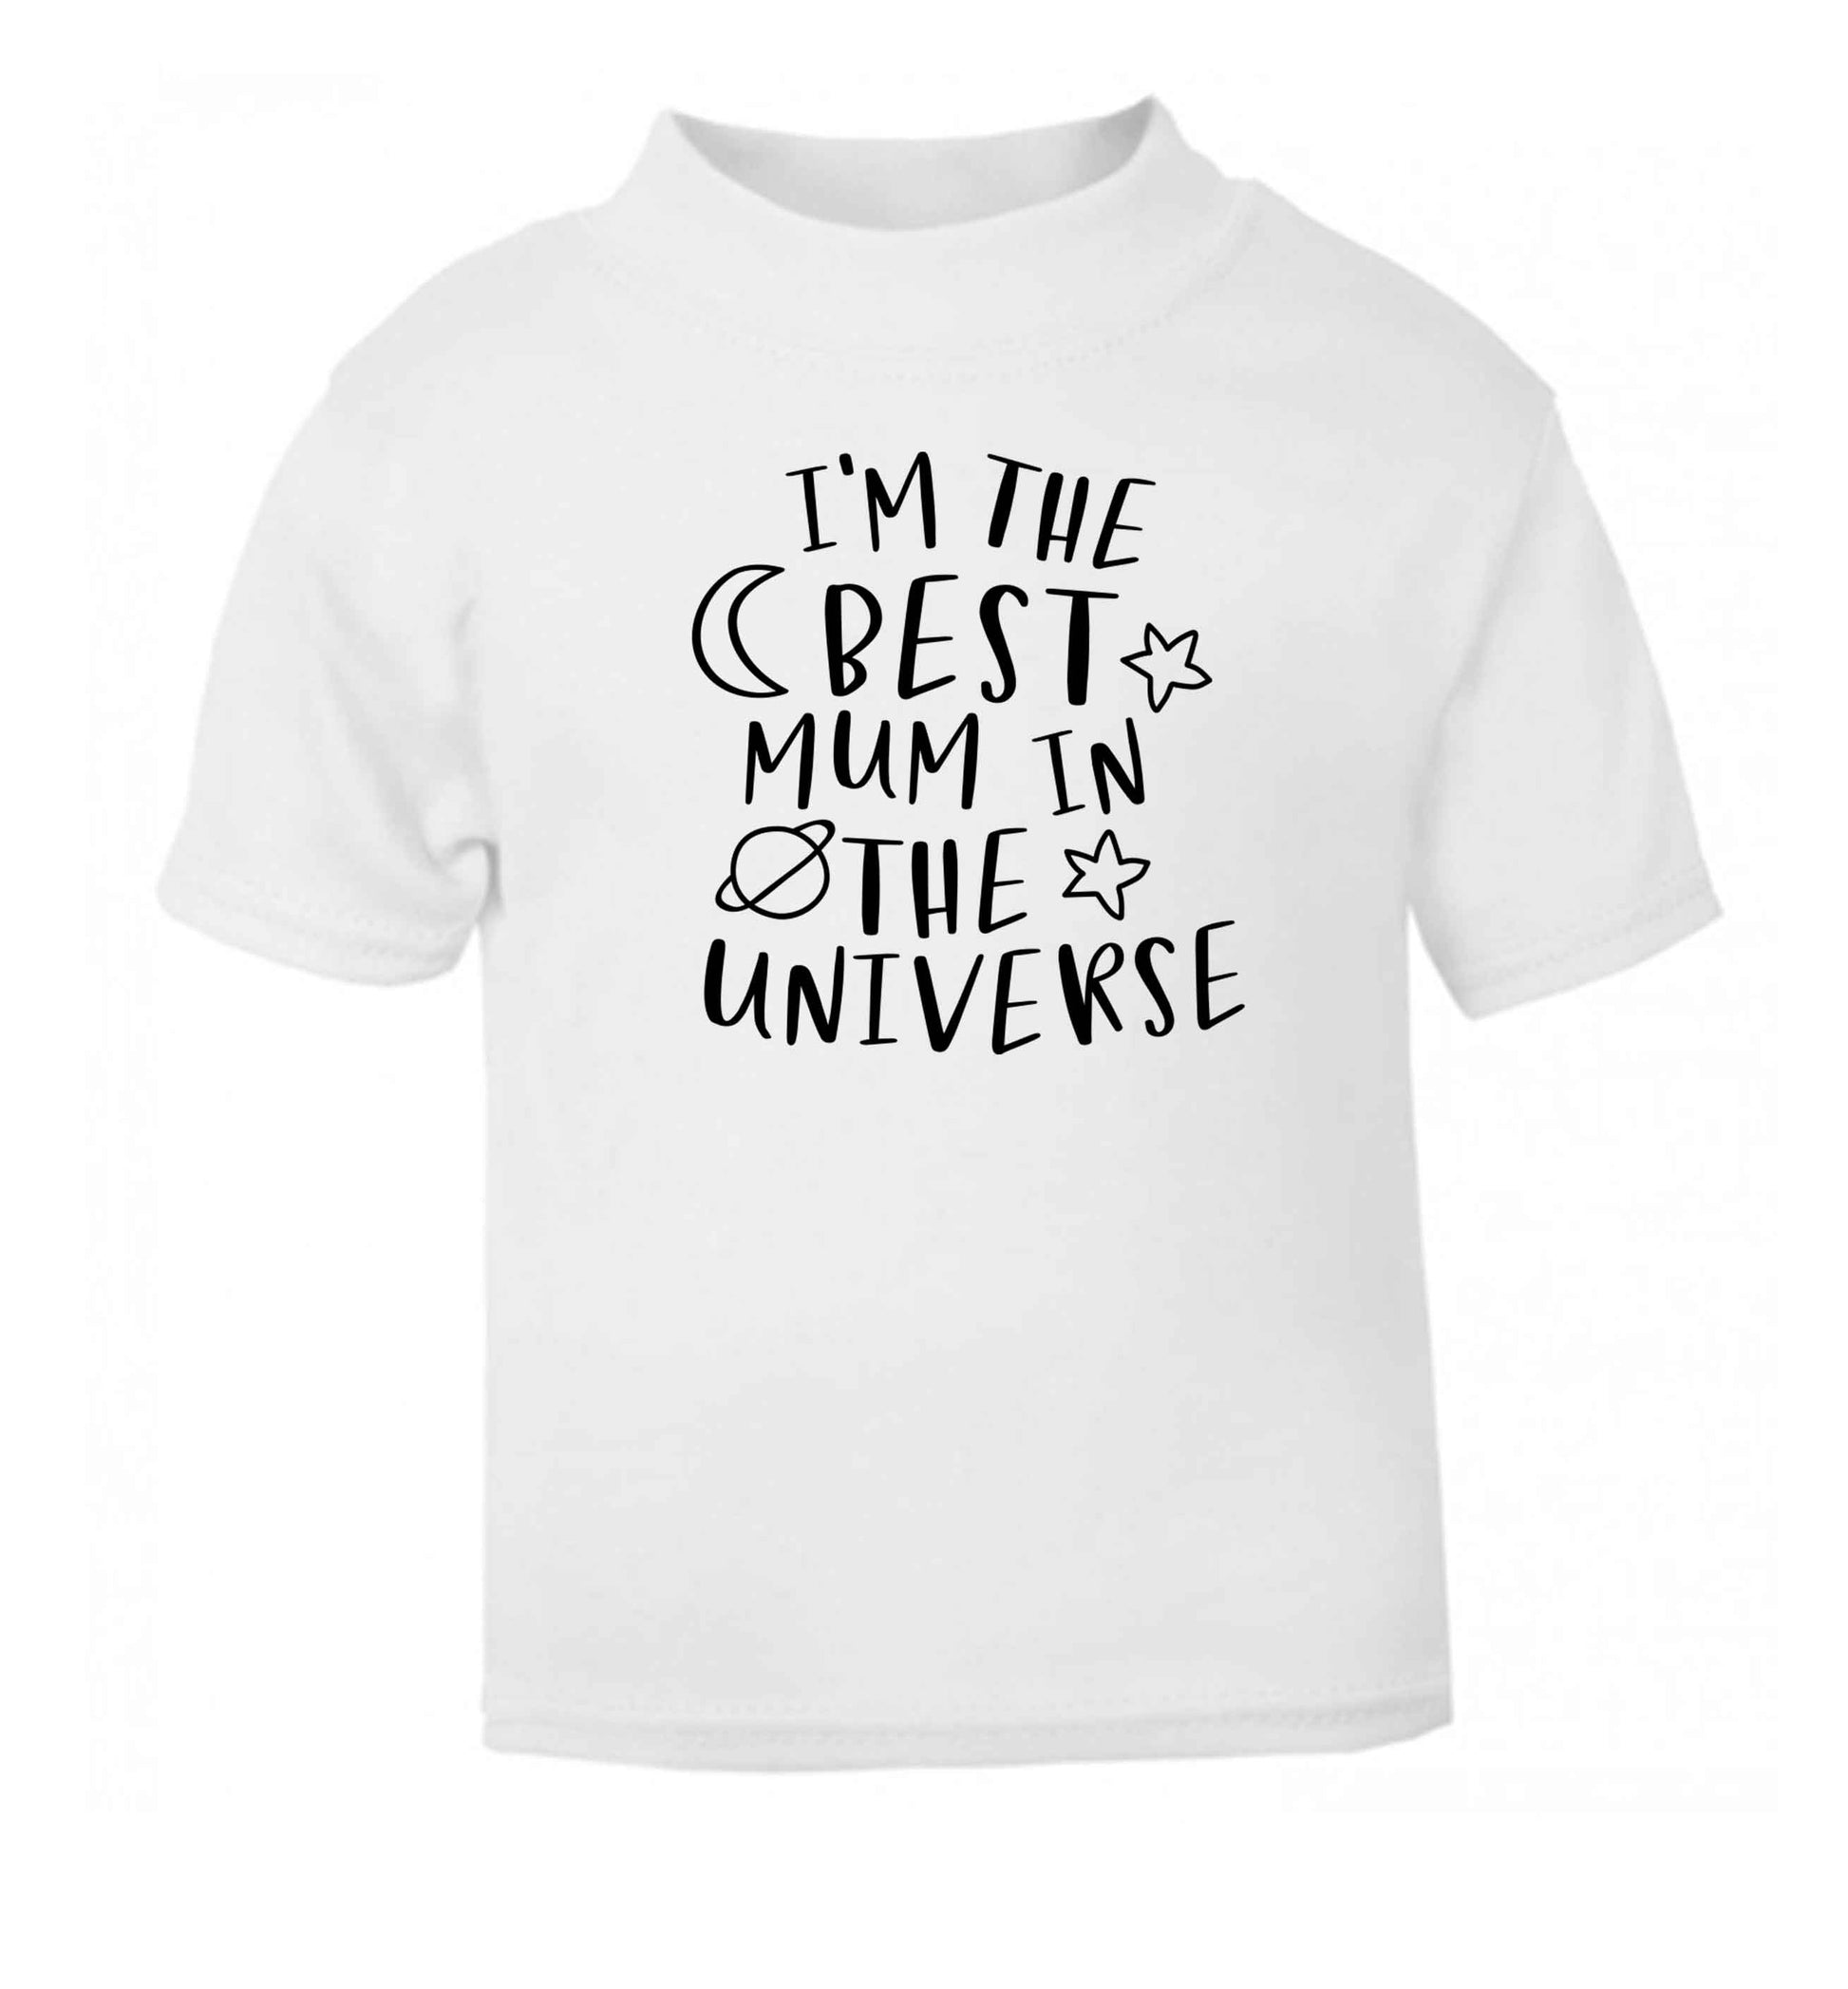 I'm the best mum in the universe white baby toddler Tshirt 2 Years